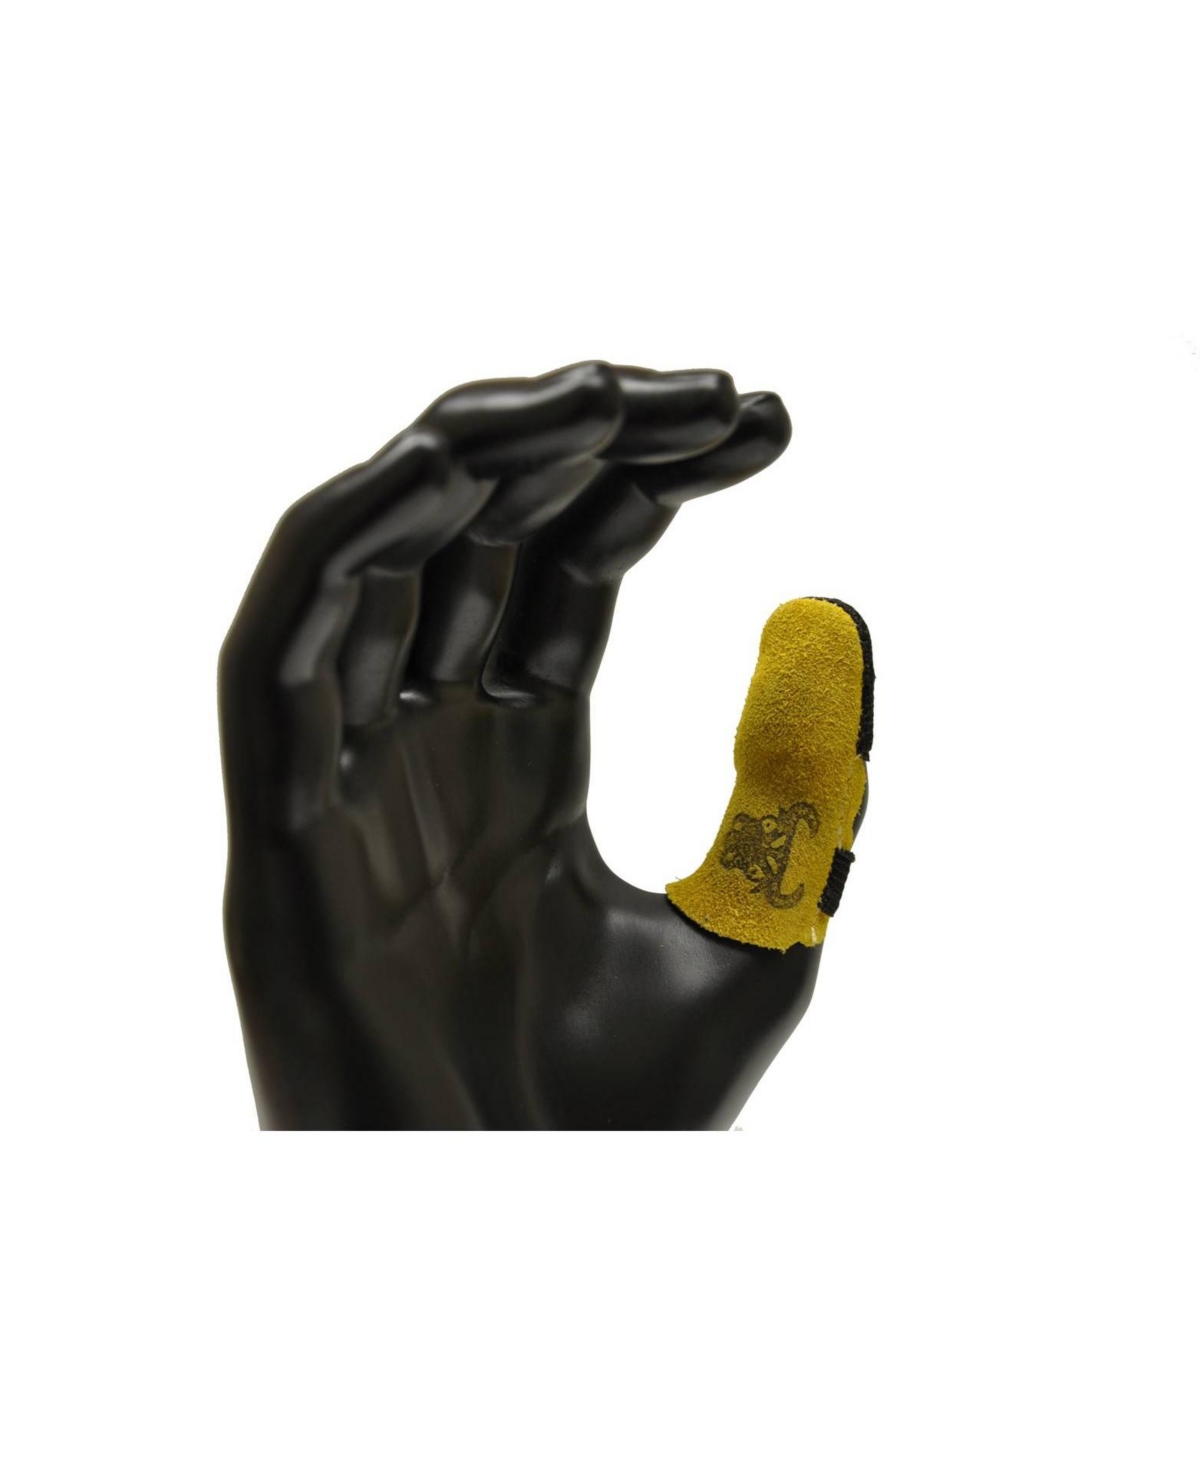 8126 Thumb Guard, Thumb Protection, sold by 1 piece - Yellow